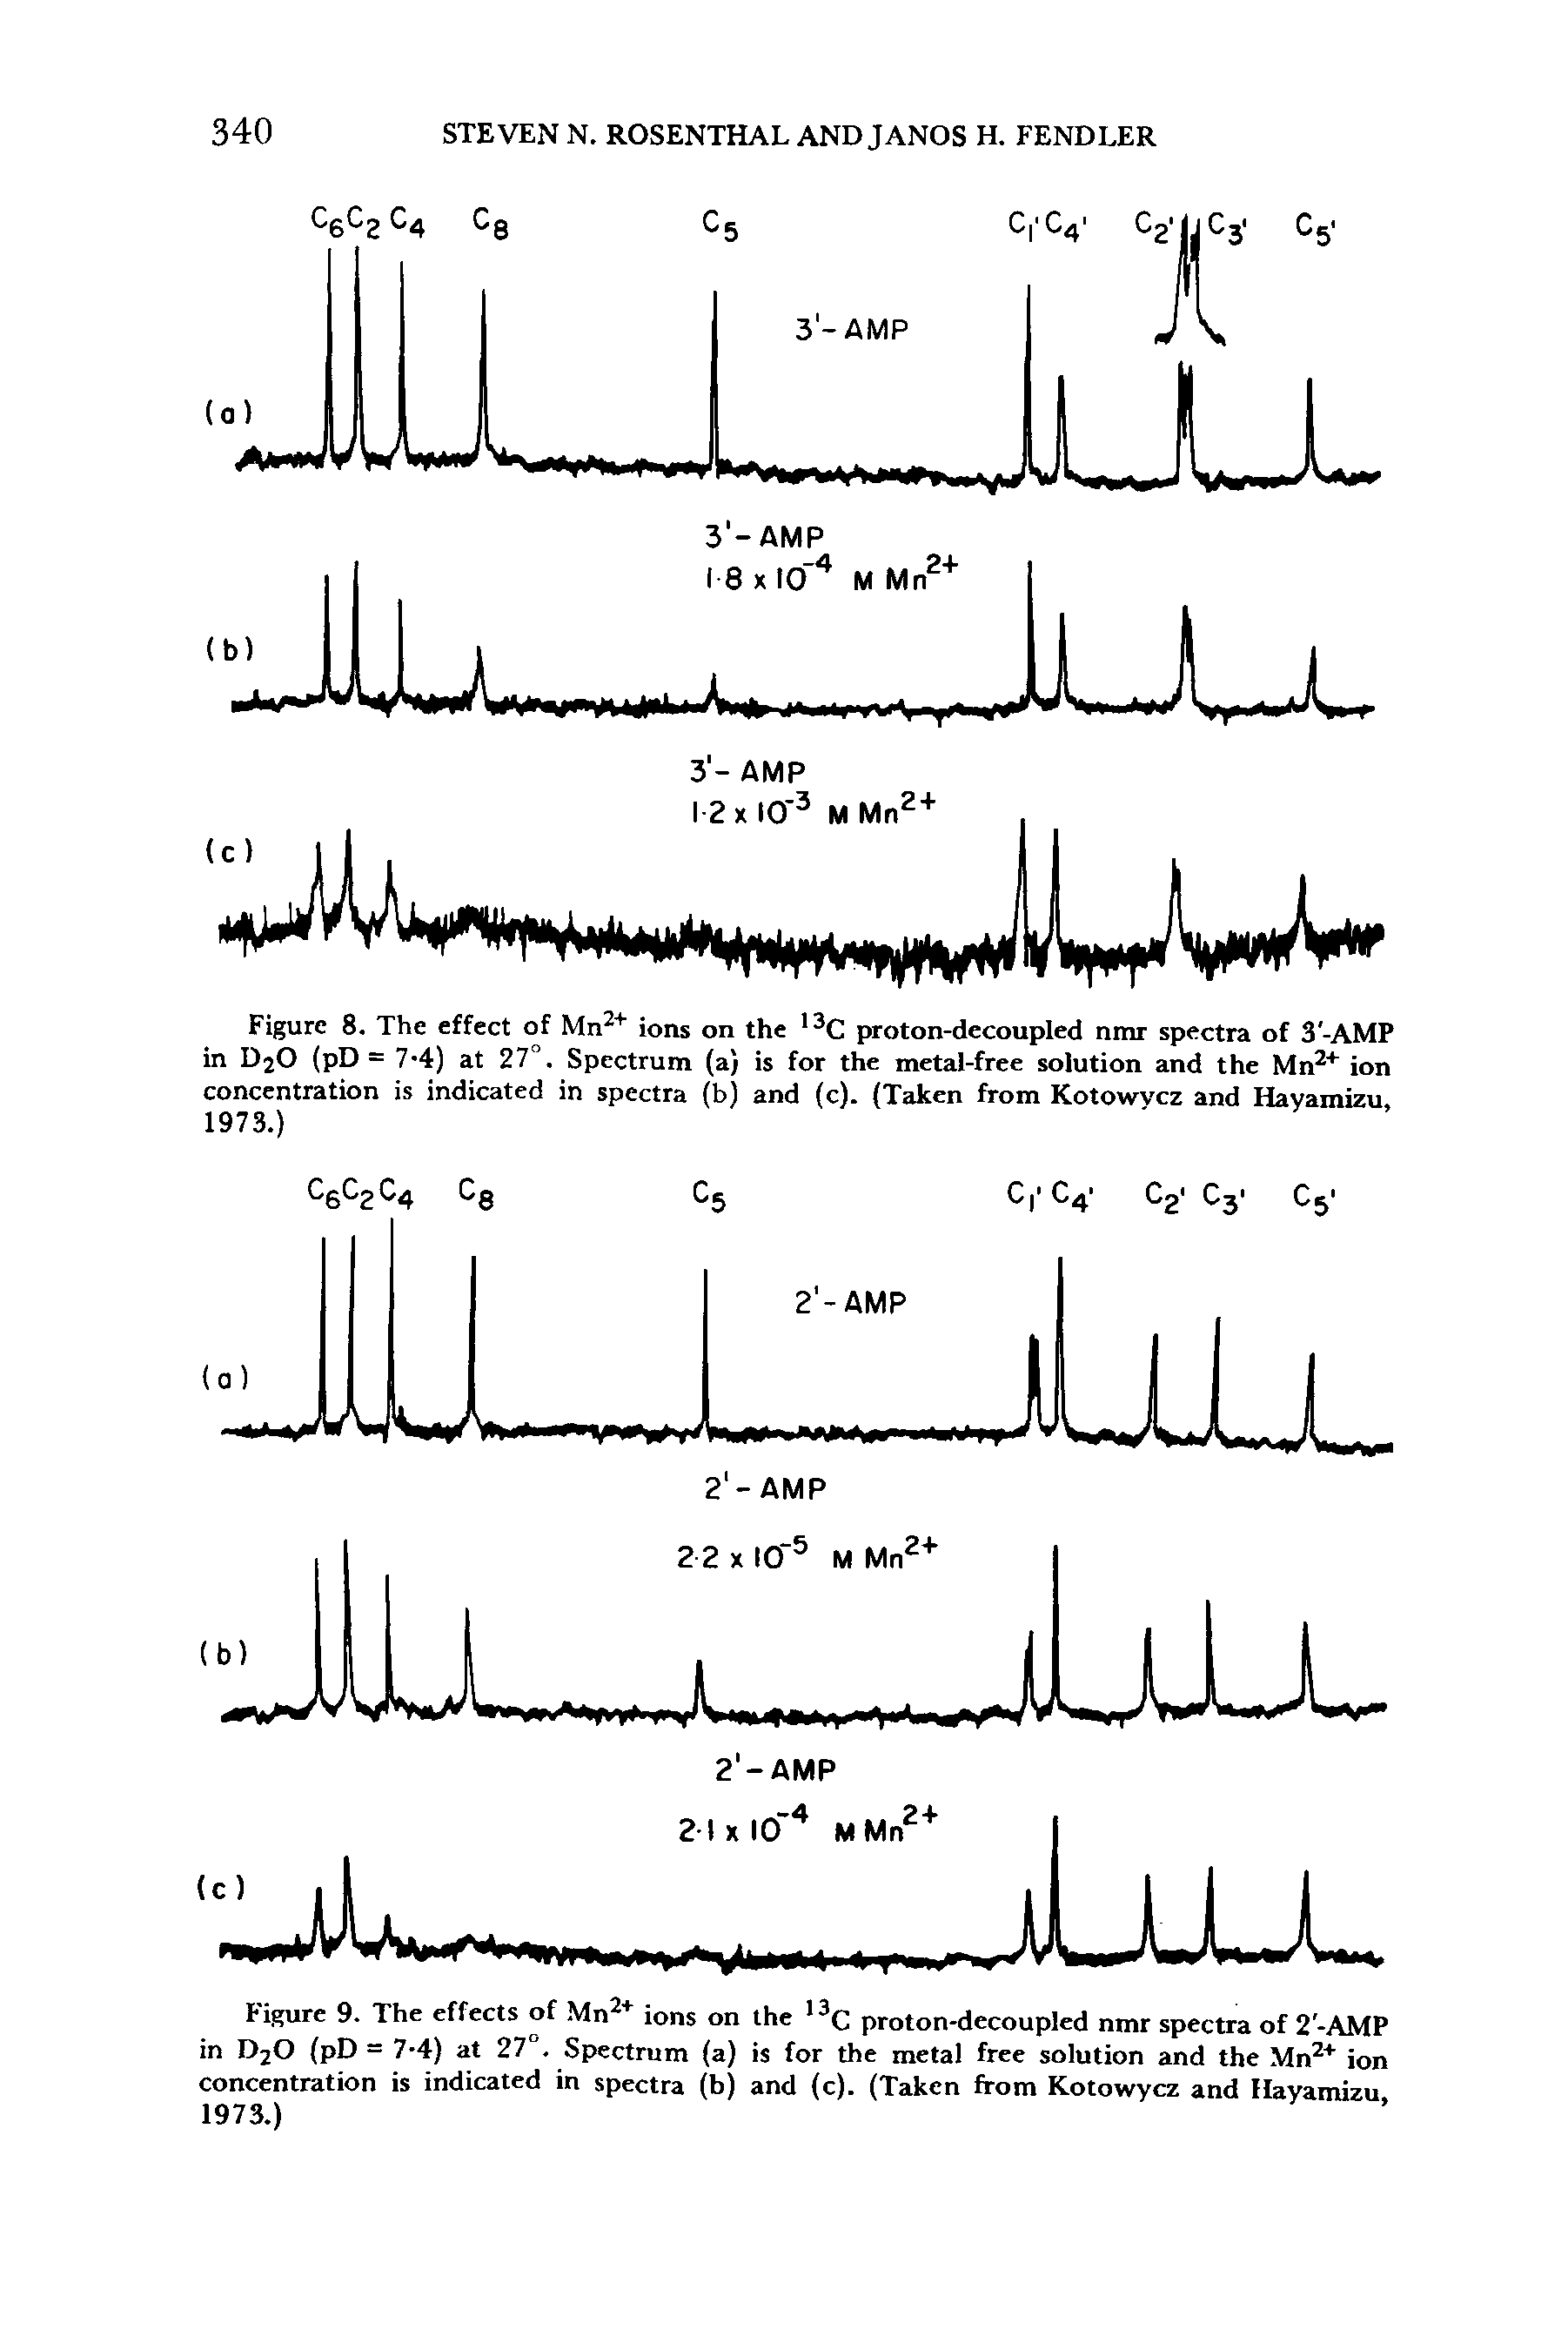 Figure 8. The effect of Mn2+ ions on the 13C proton-decoupled nmr spectra of 3-AMP in D20 (pD = 7-4) at 27°. Spectrum (a) is for the metal-free solution and the Mn2+ ion concentration is indicated in spectra (b) and (c). (Taken from Kotowycz and Hayamizu, 1973.)...